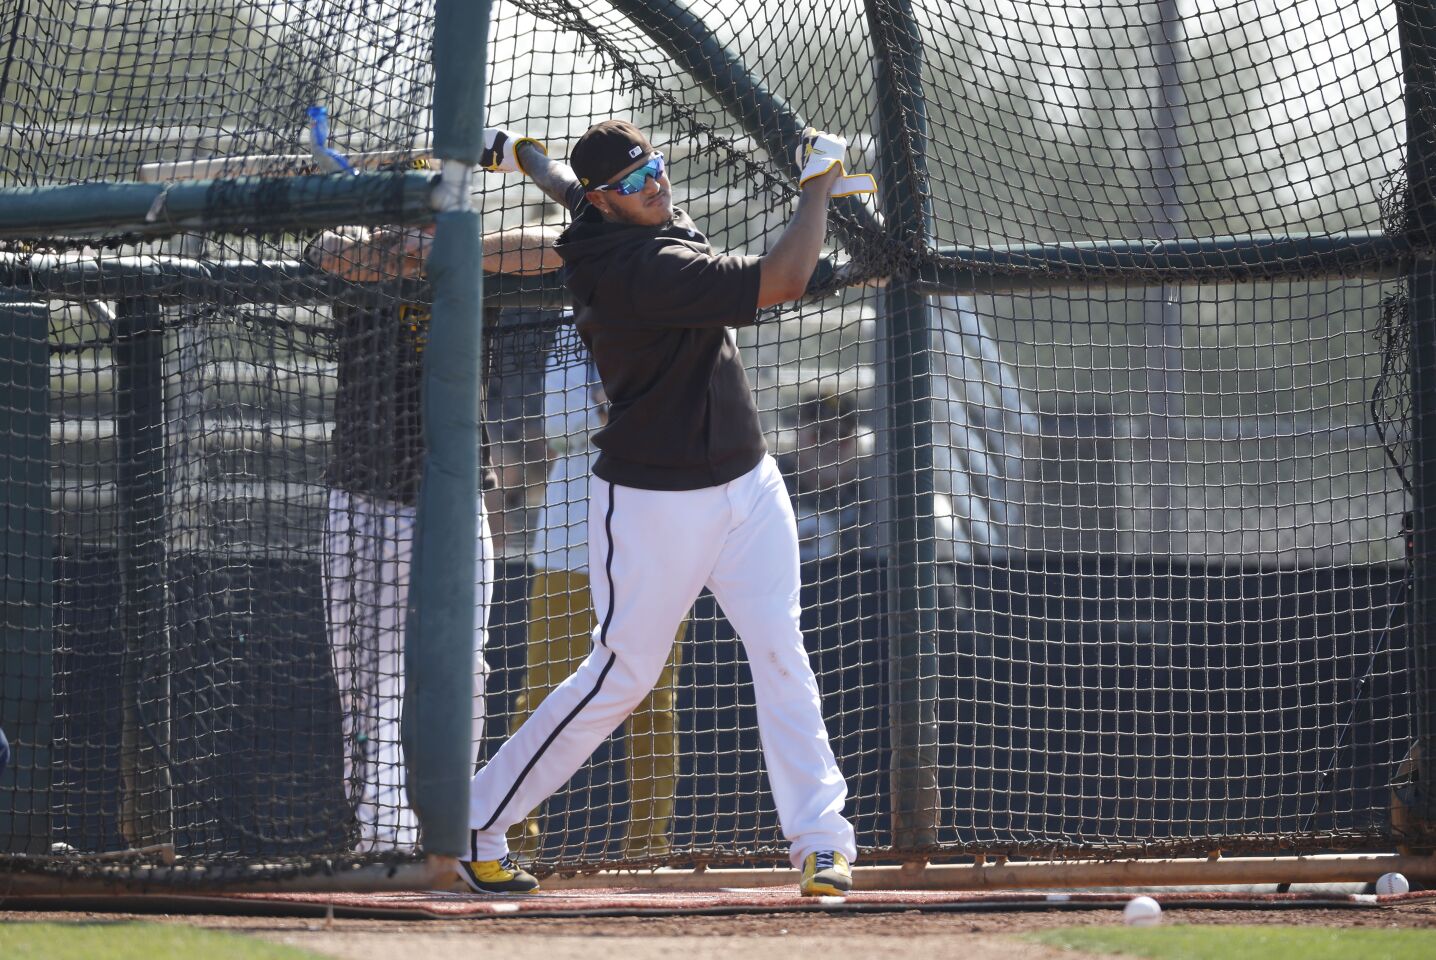 San Diego Padres Manny Machado bats during a spring training practice on Feb. 18, 2020.